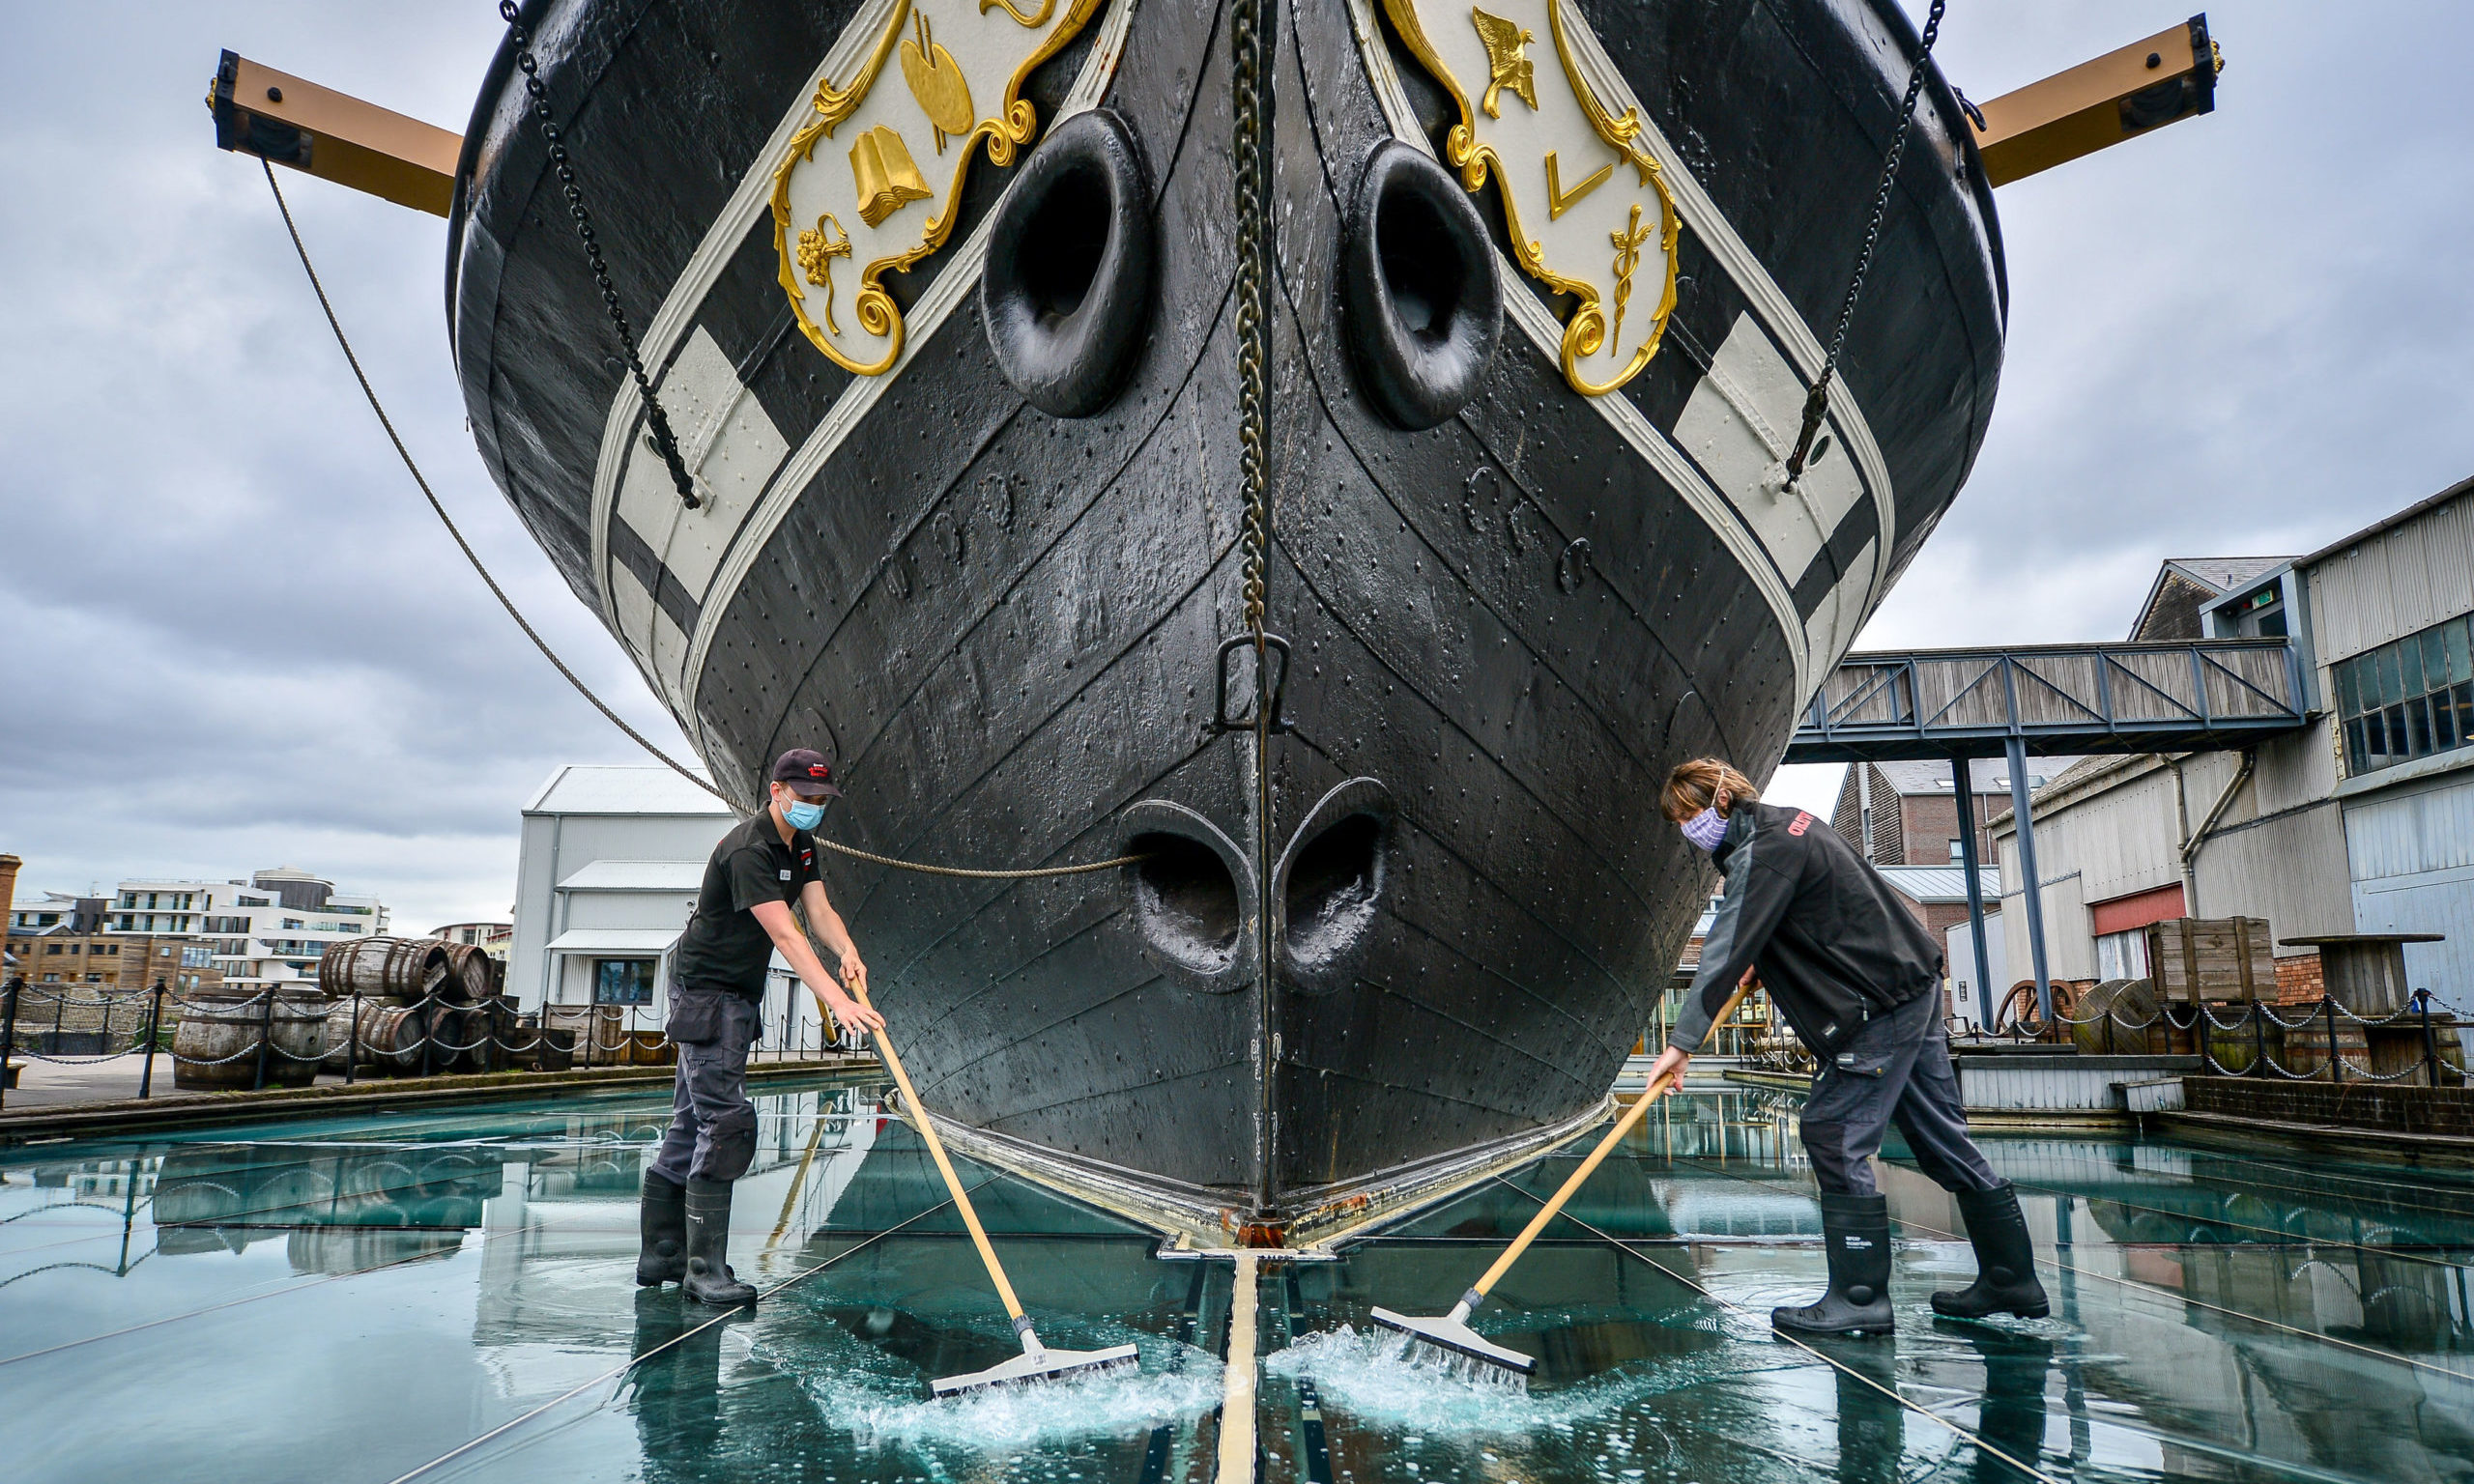 Technical services staff clean the surface of the glass sea, which is a series of glass plates surrounding Brunell's SS Great Britain and filled with water to create a sea effect, as the attraction reopens on Saturday, July 18, marking the 50th anniversary of the ships return back home to Bristol, after the lifting of further coronavirus lockdown restrictions in England. PA Photo. Picture date: Thursday July 16, 2020. See PA story HEALTH Coronavirus. Photo credit should read: Ben Birchall/PA Wire